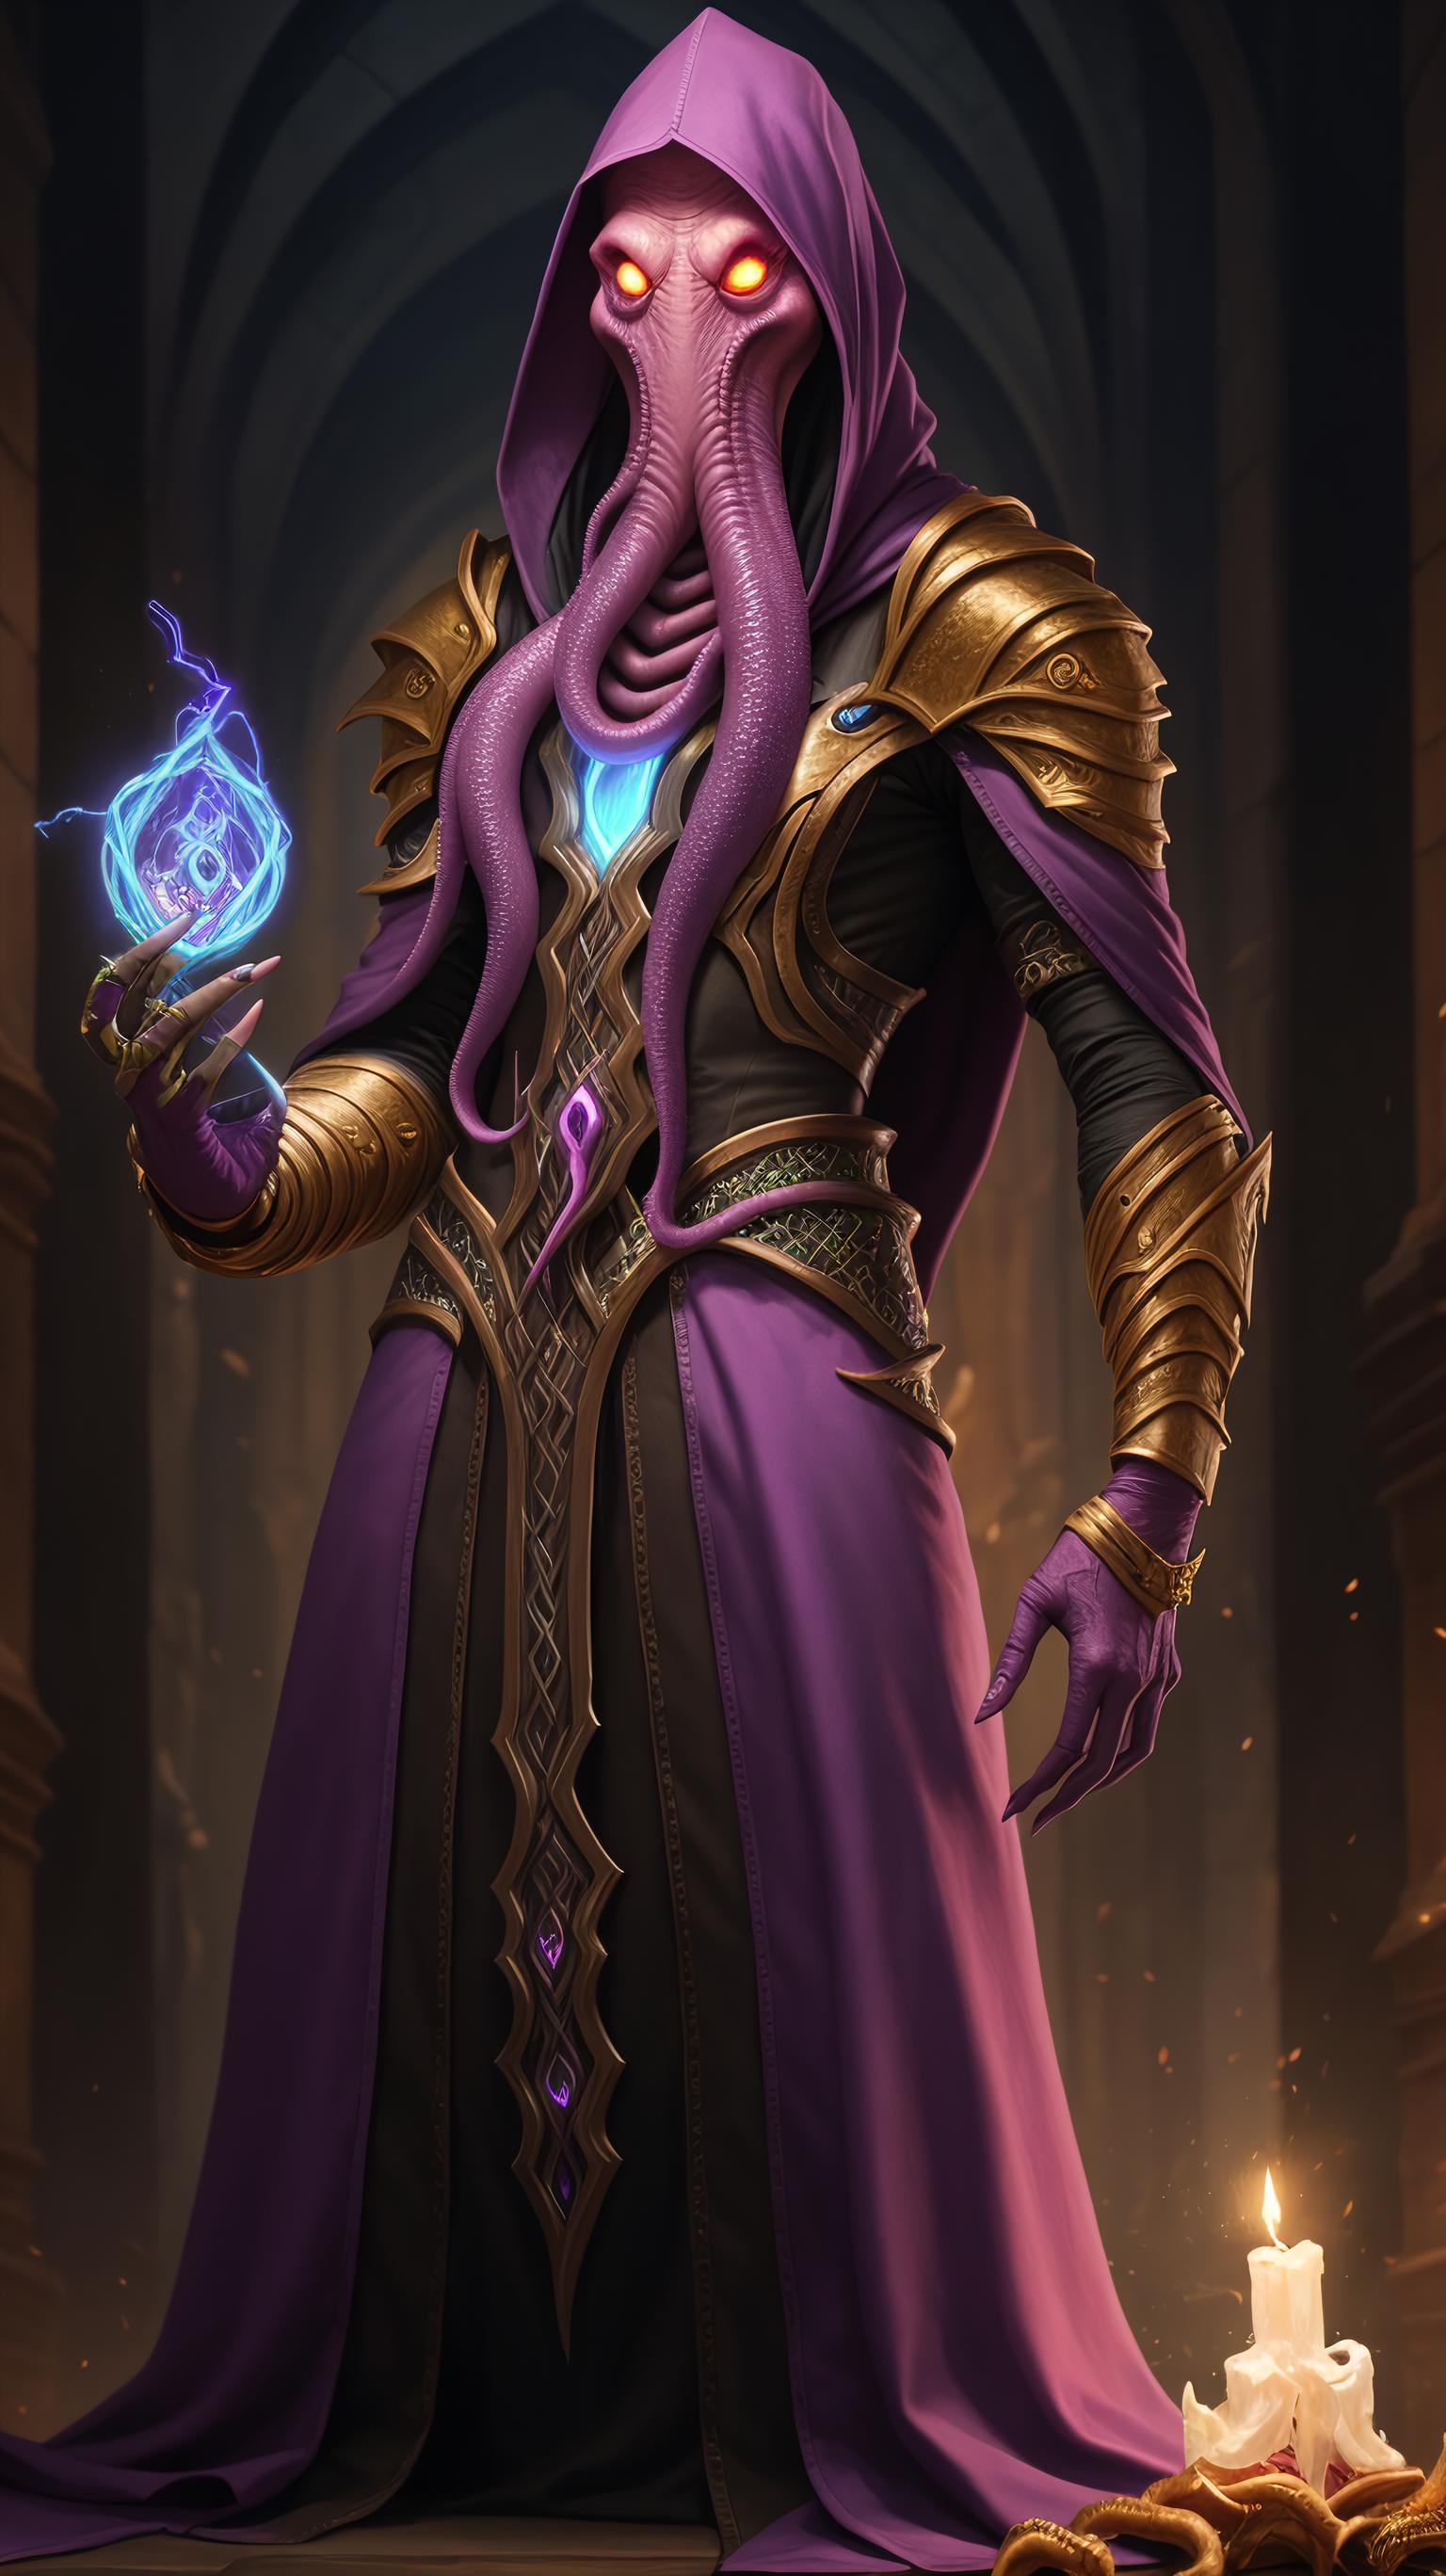 A digital art depiction of a person wearing a purple robe and holding a blue orb.